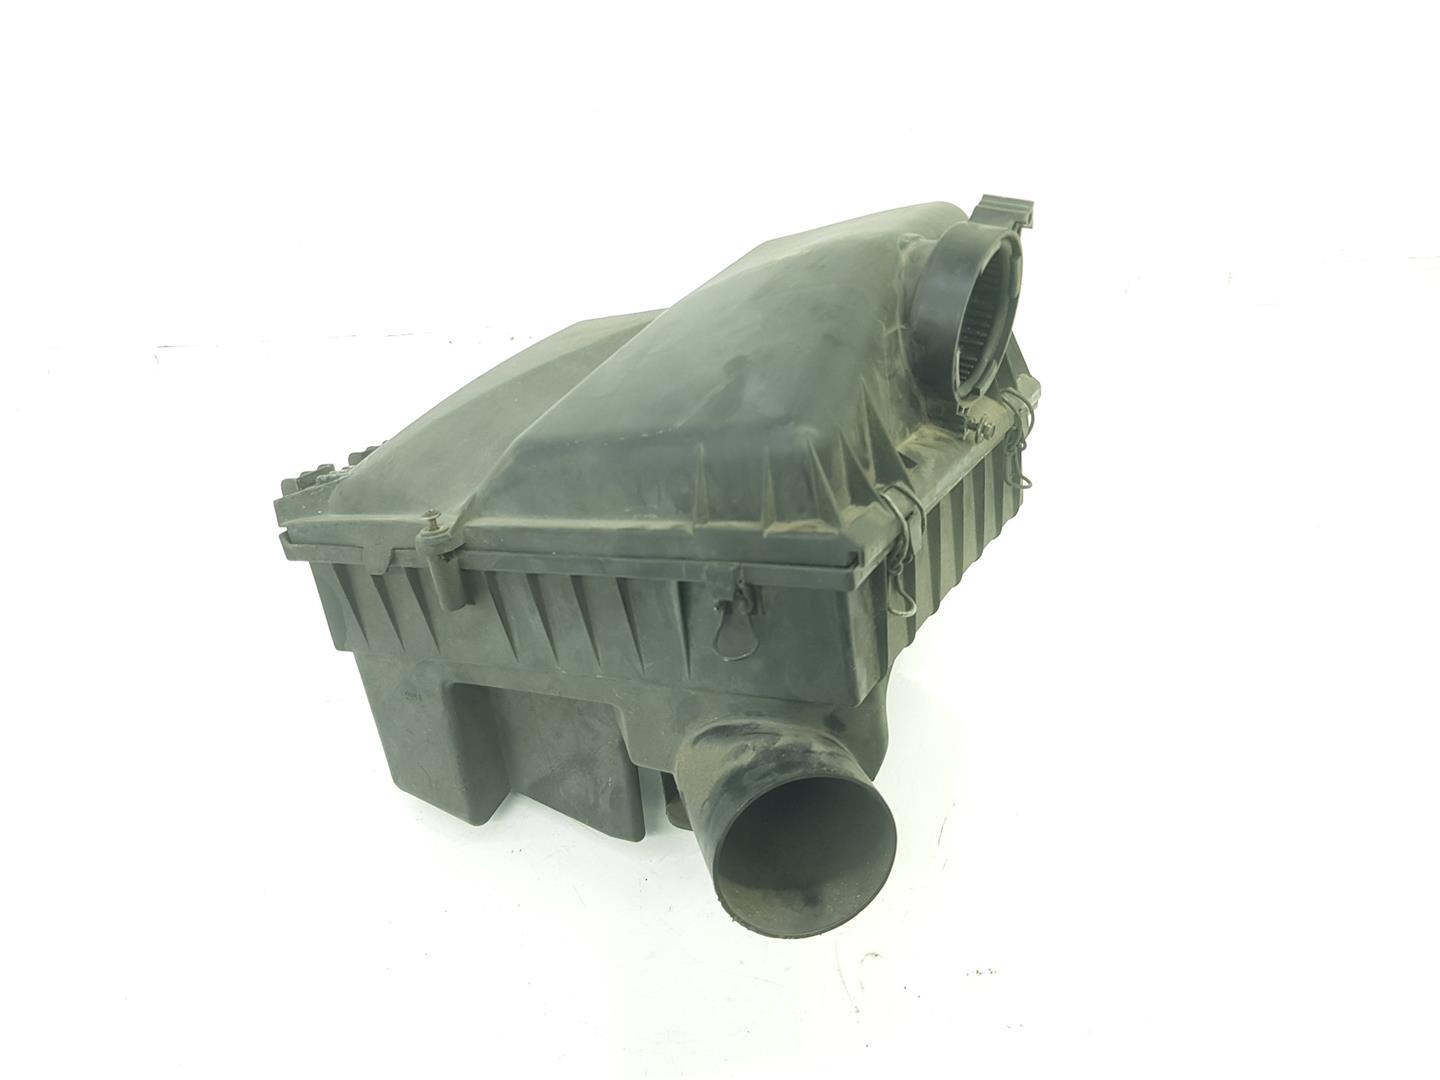 MERCEDES-BENZ V-Class W638, W639 (1996-2003) Other Engine Compartment Parts A6380902101, A6380902101 19810032